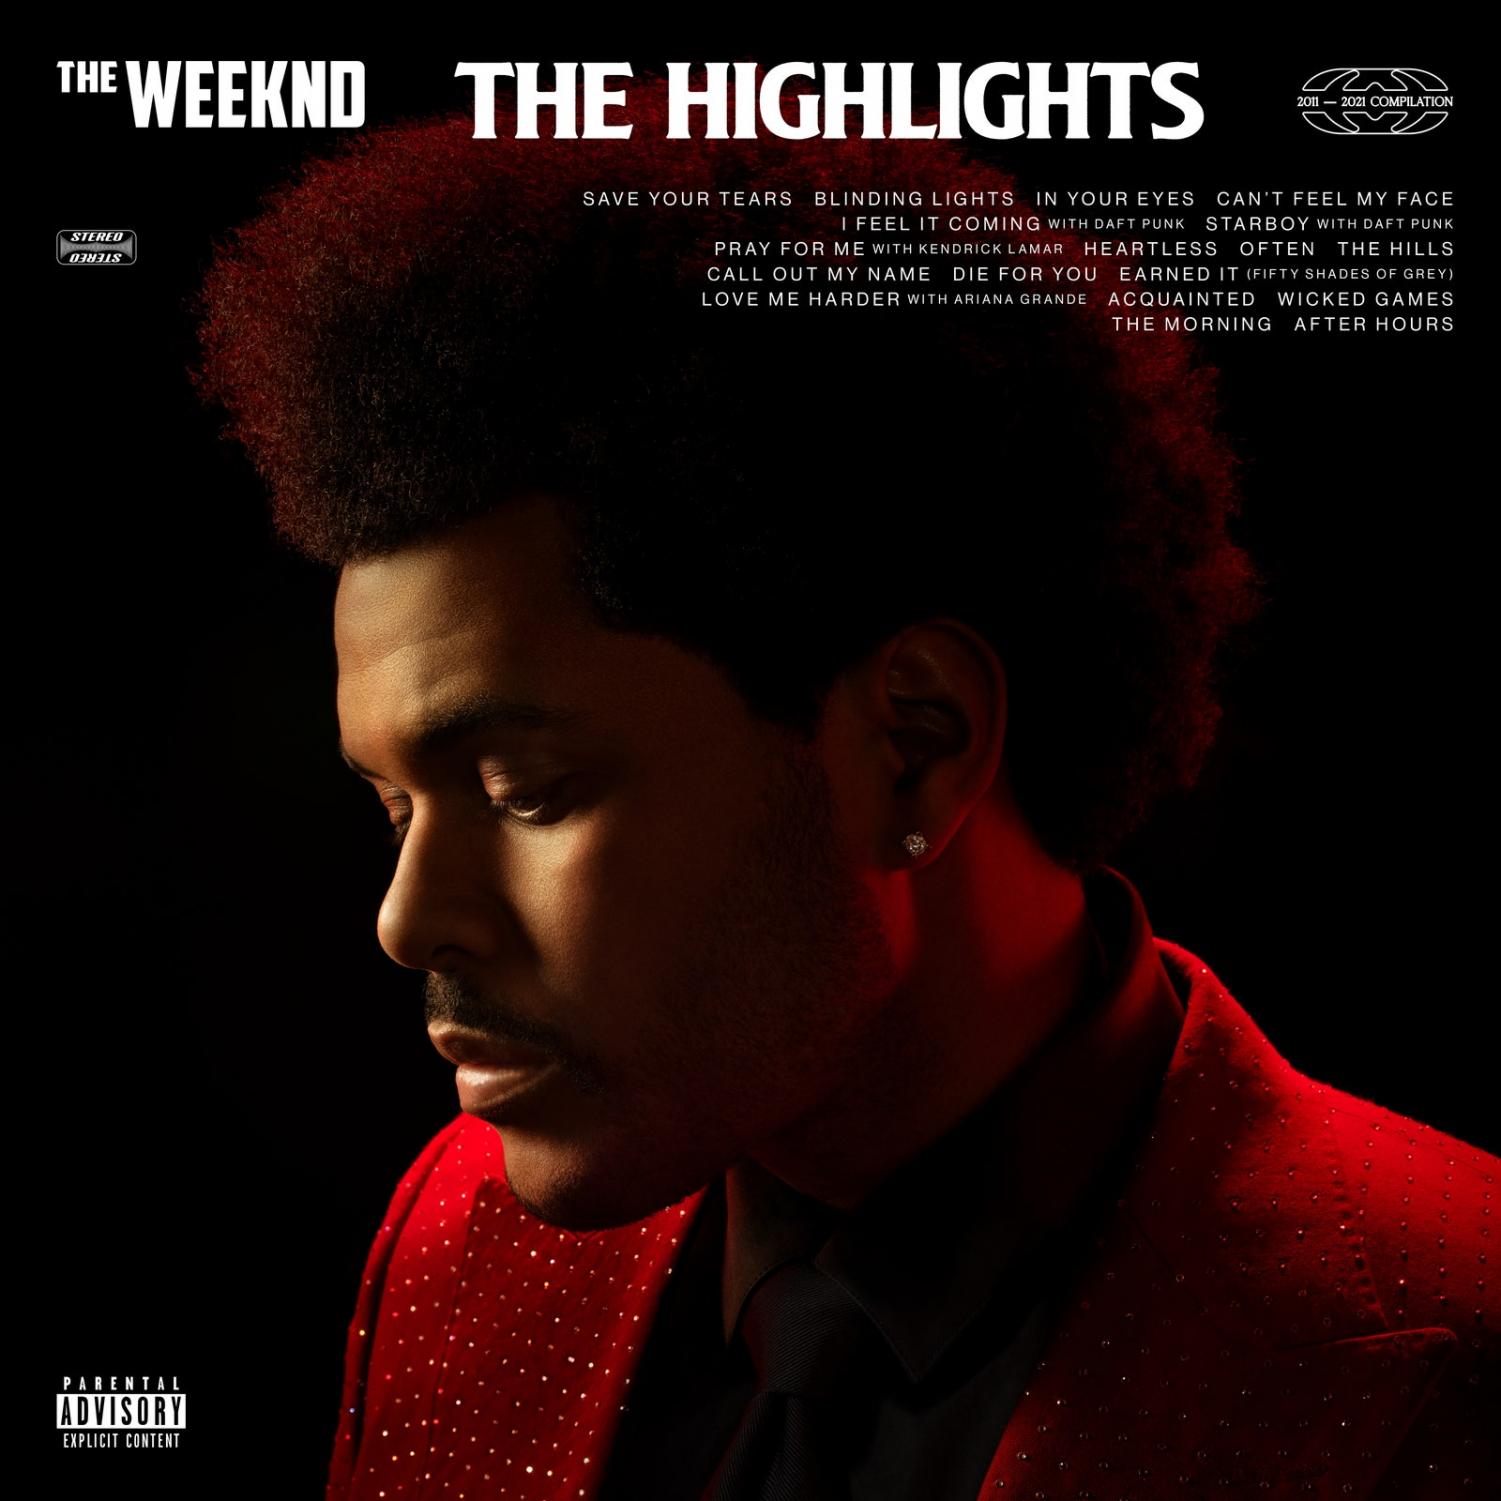 The Weeknd Album “the Highlights” The Sandscript